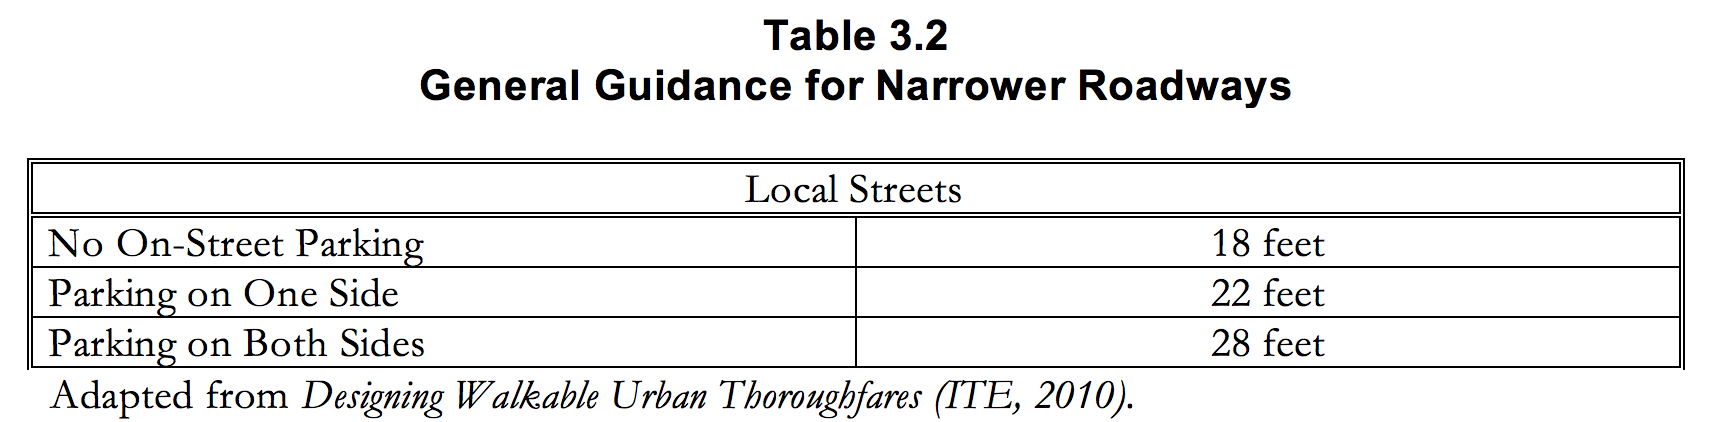 Table 3.2 General guidance for narrower roadways